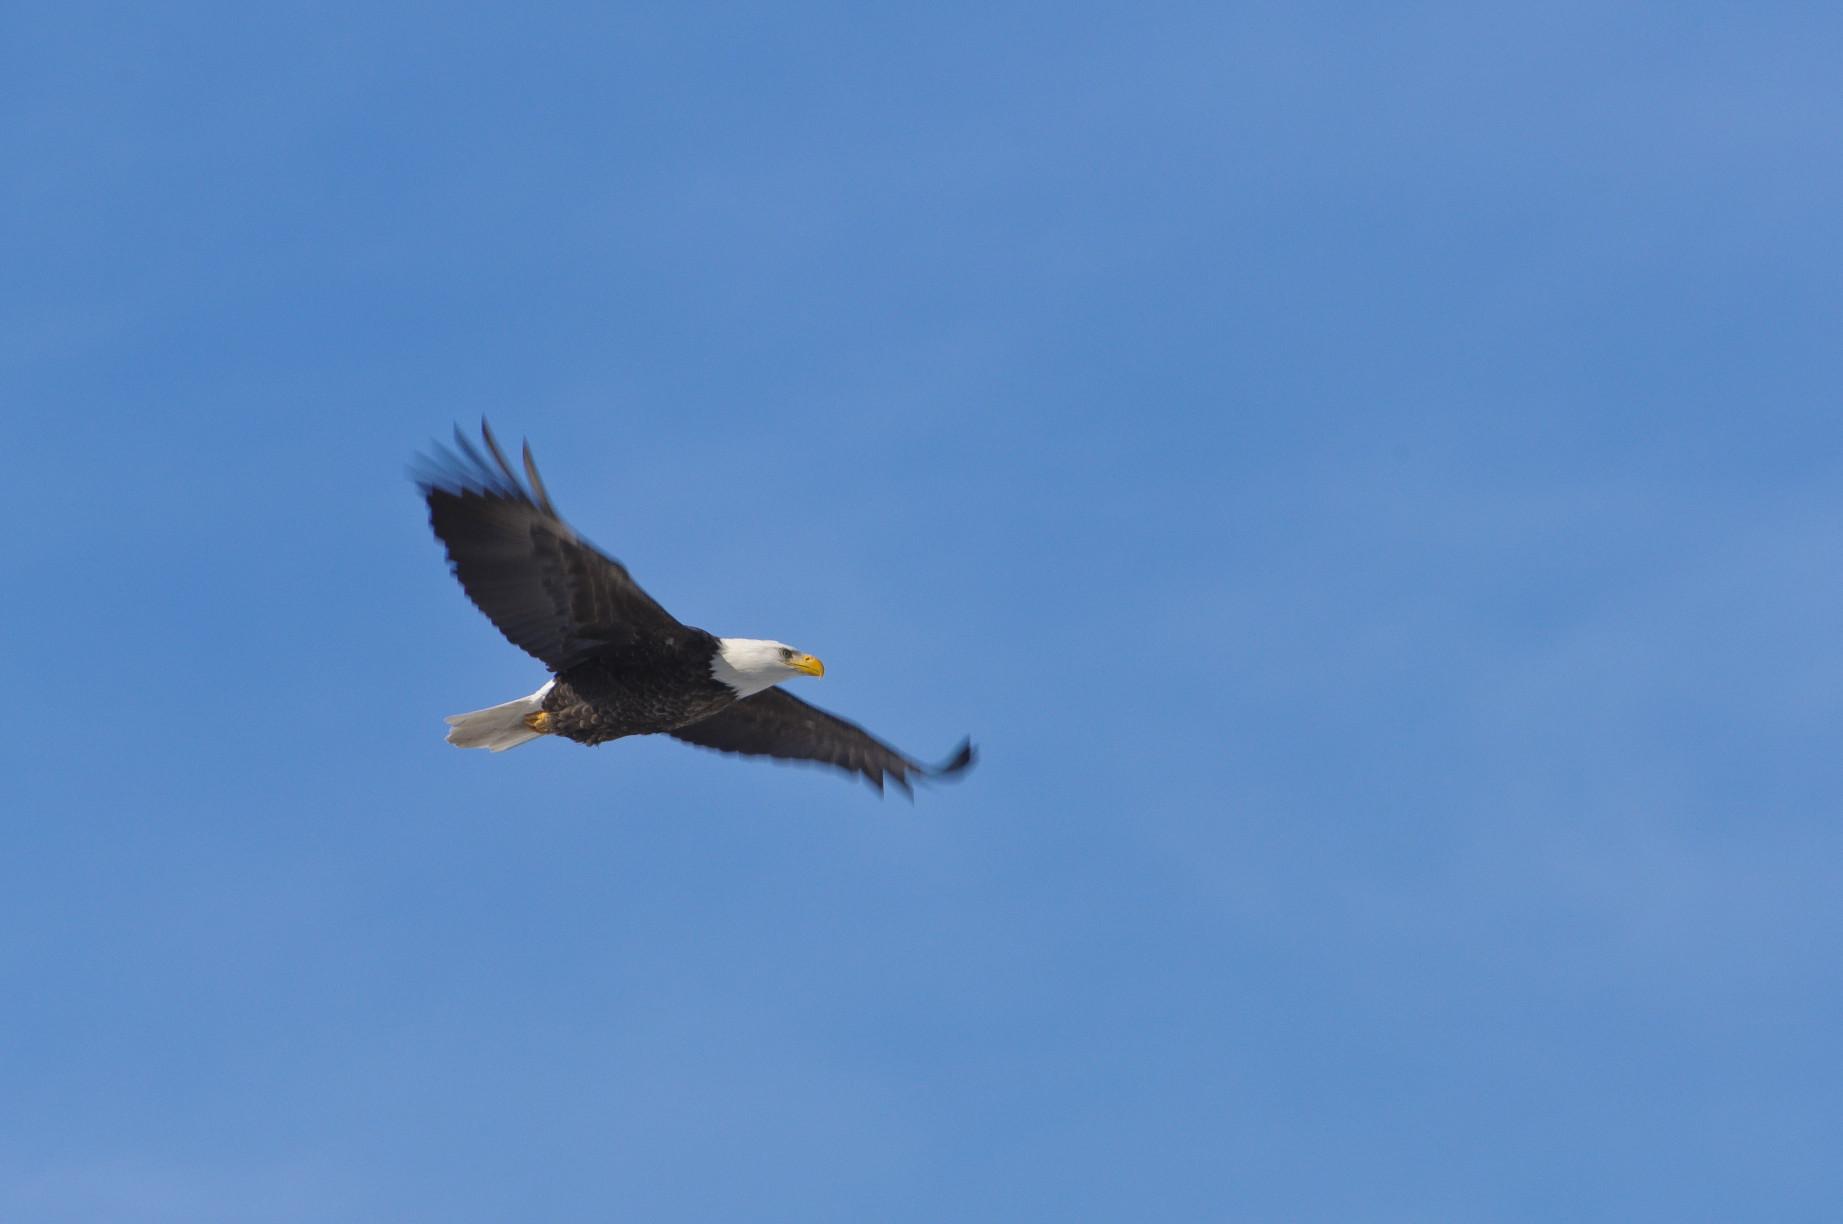 A Wisconsin driver’s car was dented by an eagle dropping a fish.